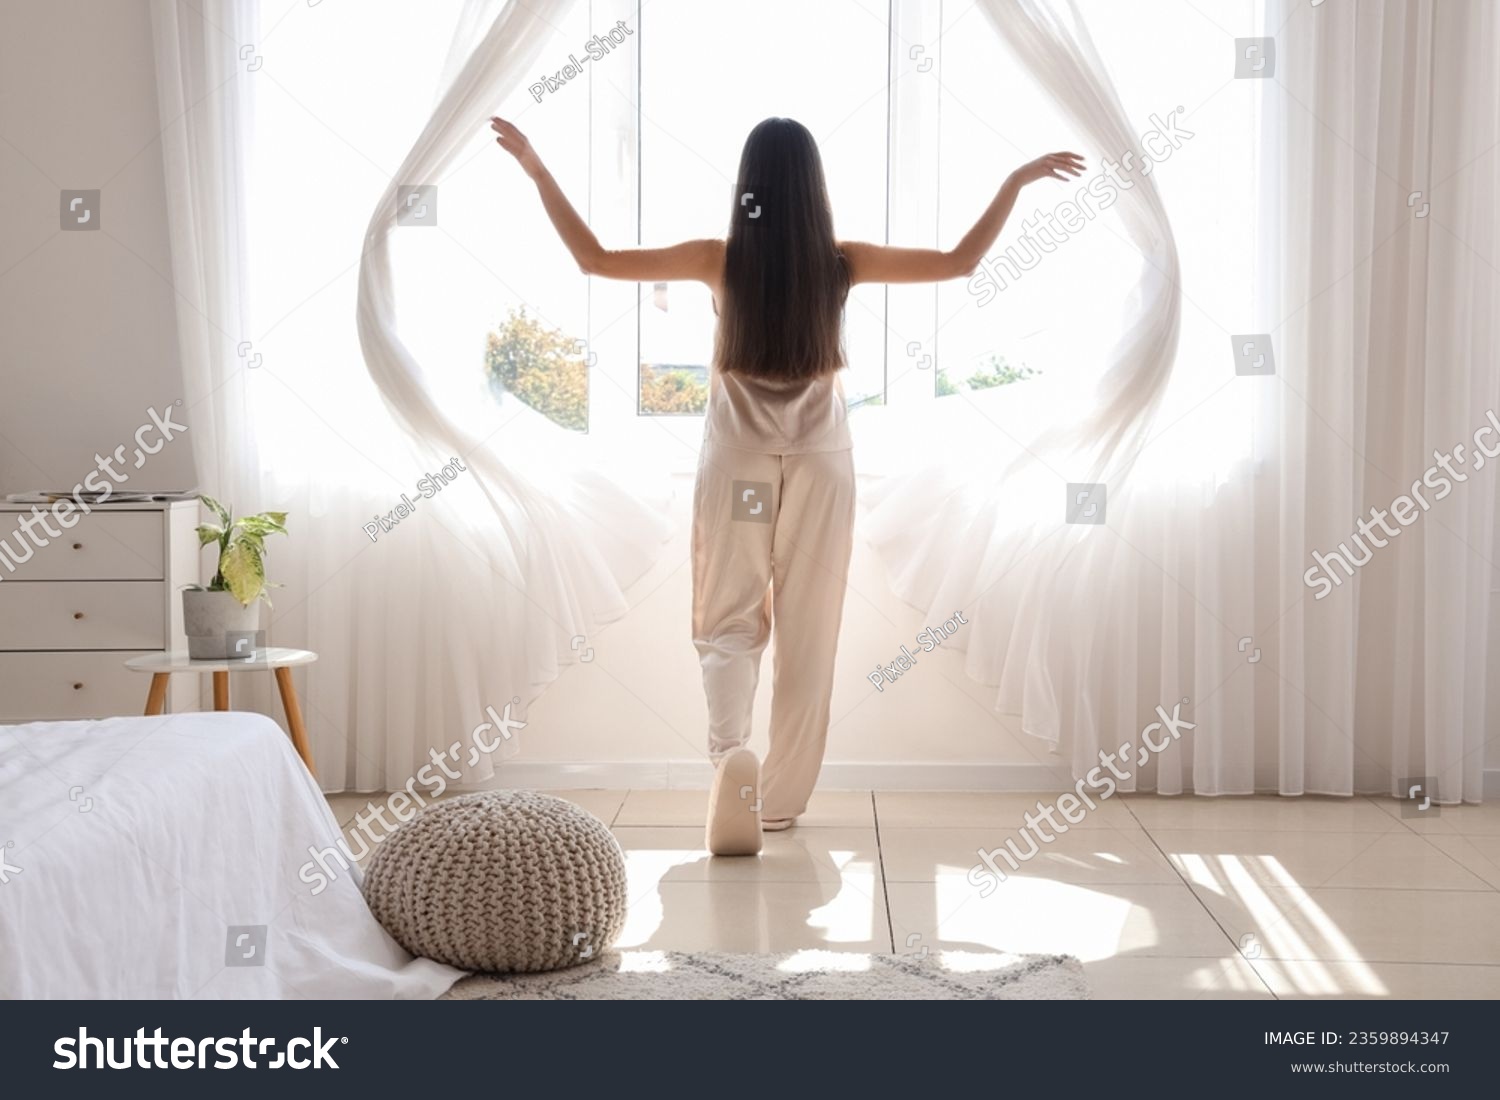 Morning of pretty young woman opening curtains in bedroom #2359894347